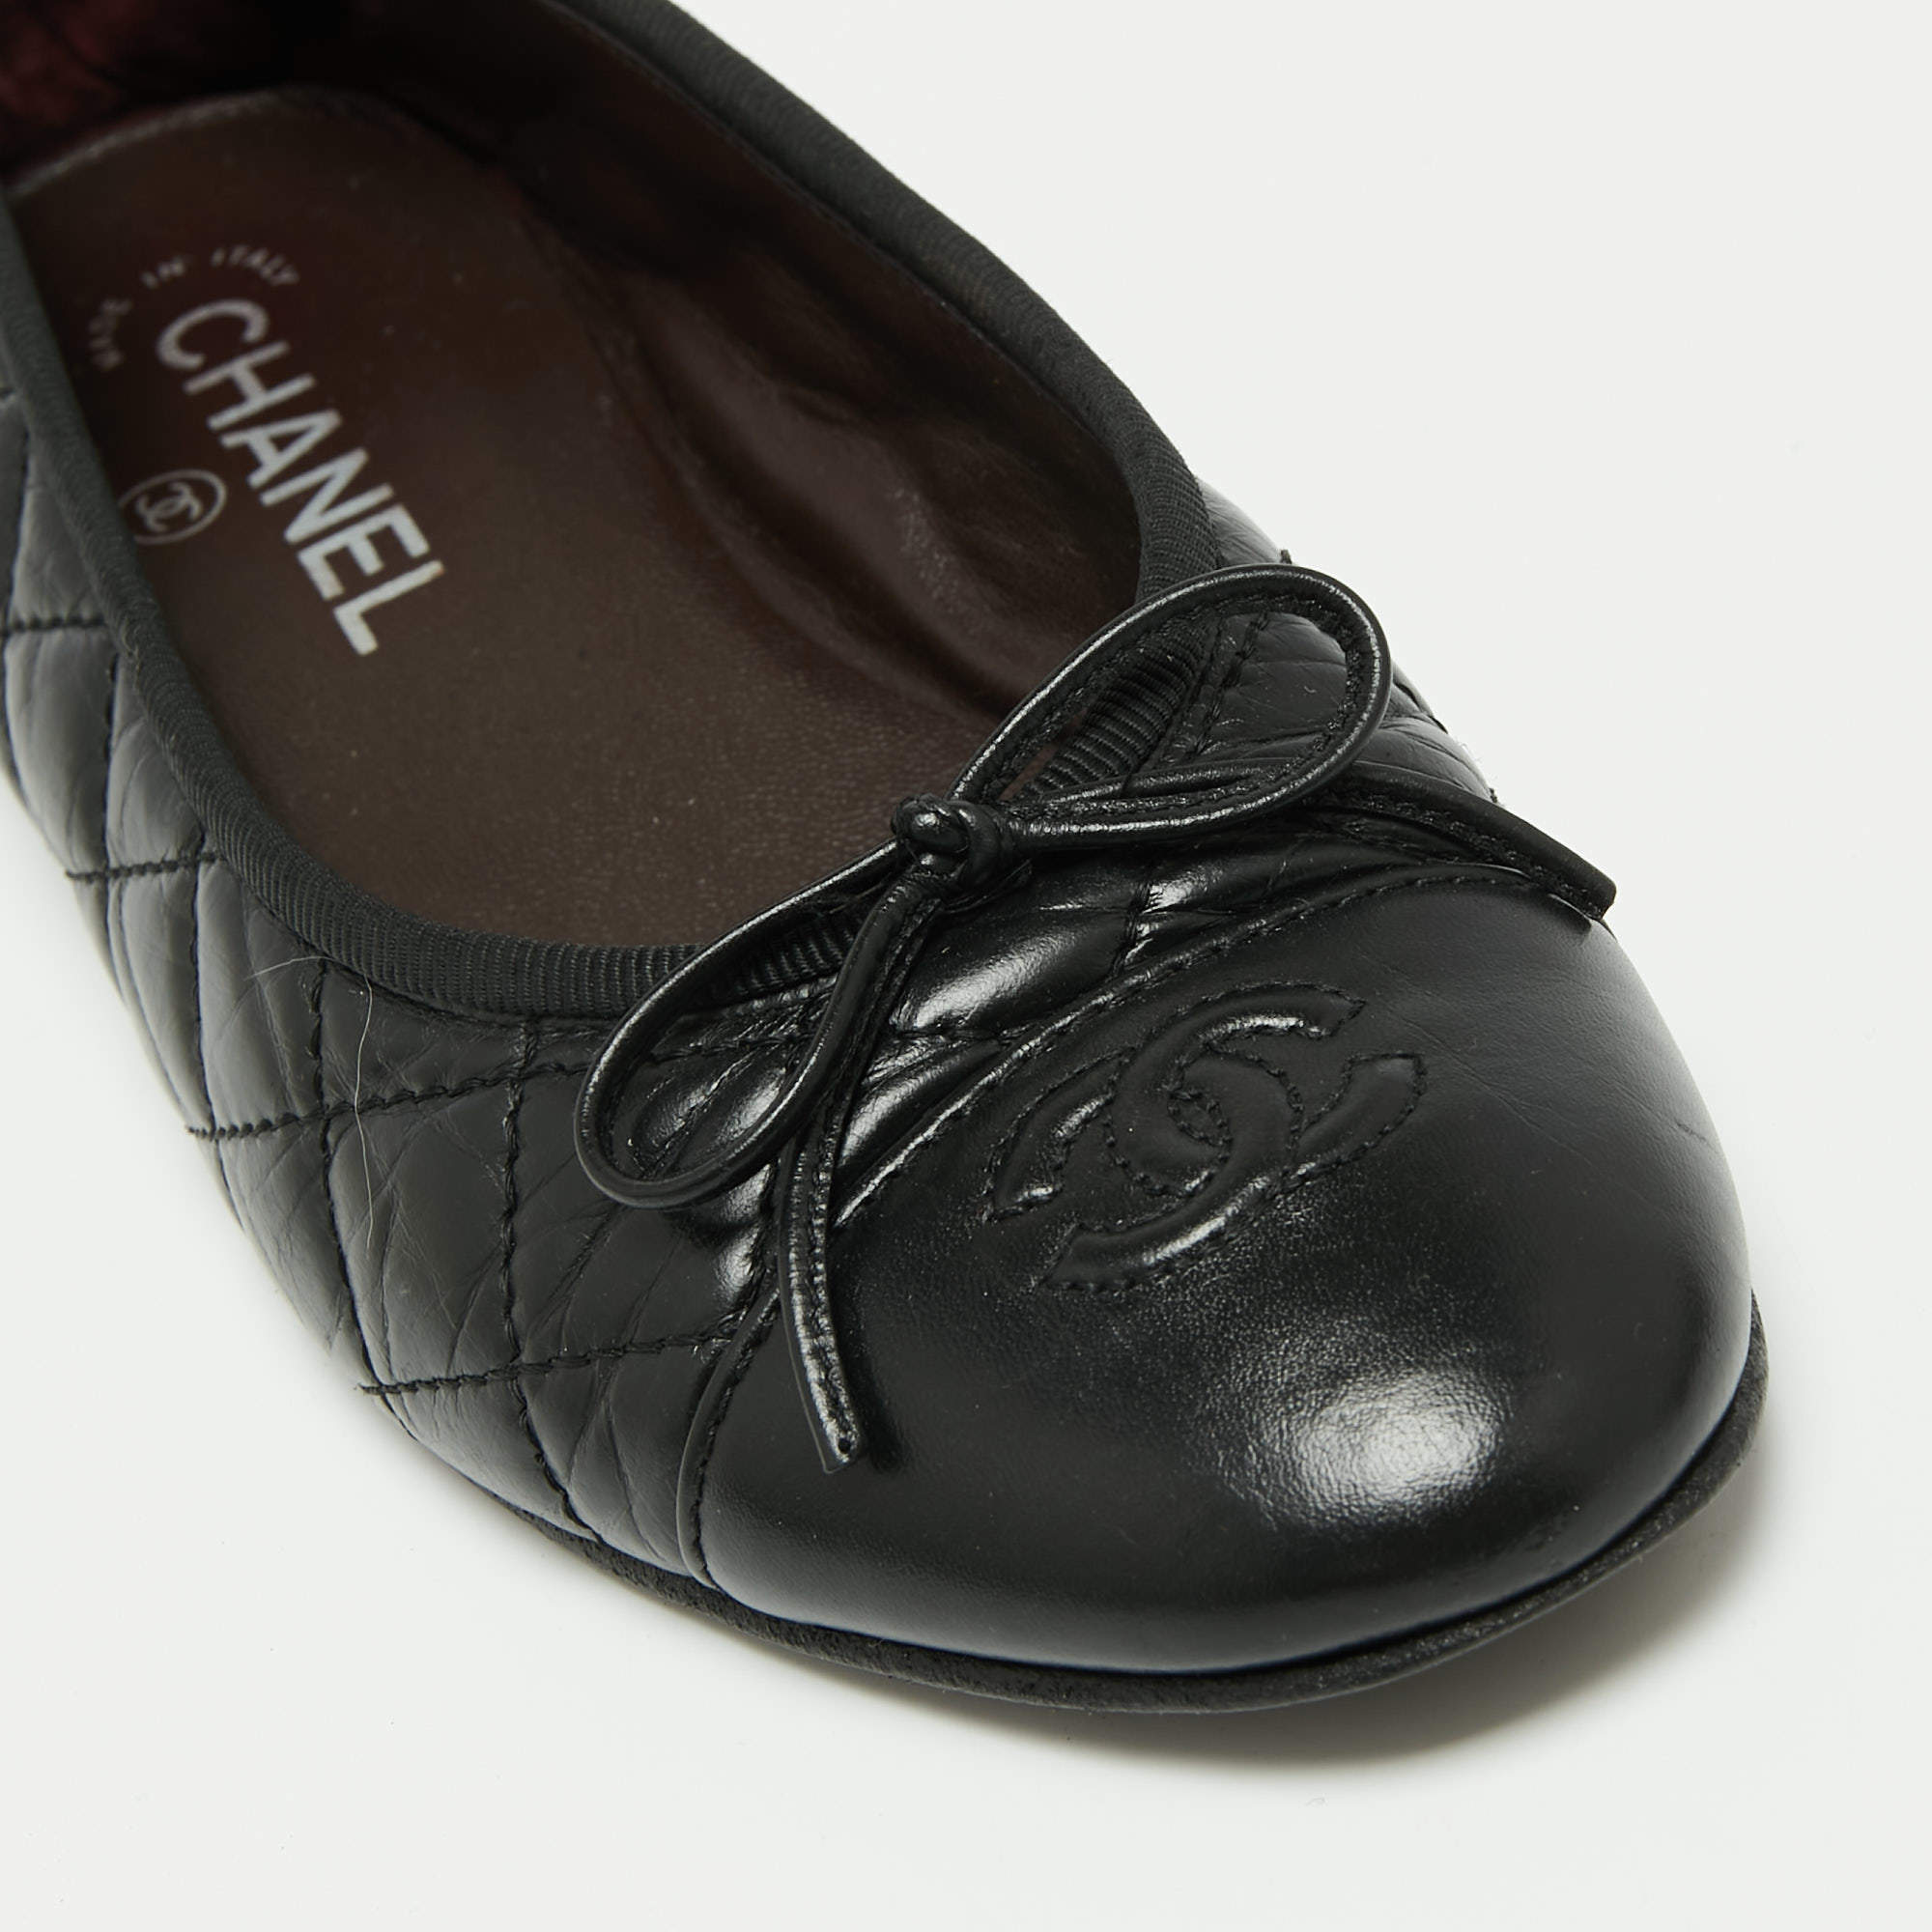 Chanel Black Quilted Leather Bow CC Cap Toe Ballet Flats Size 37